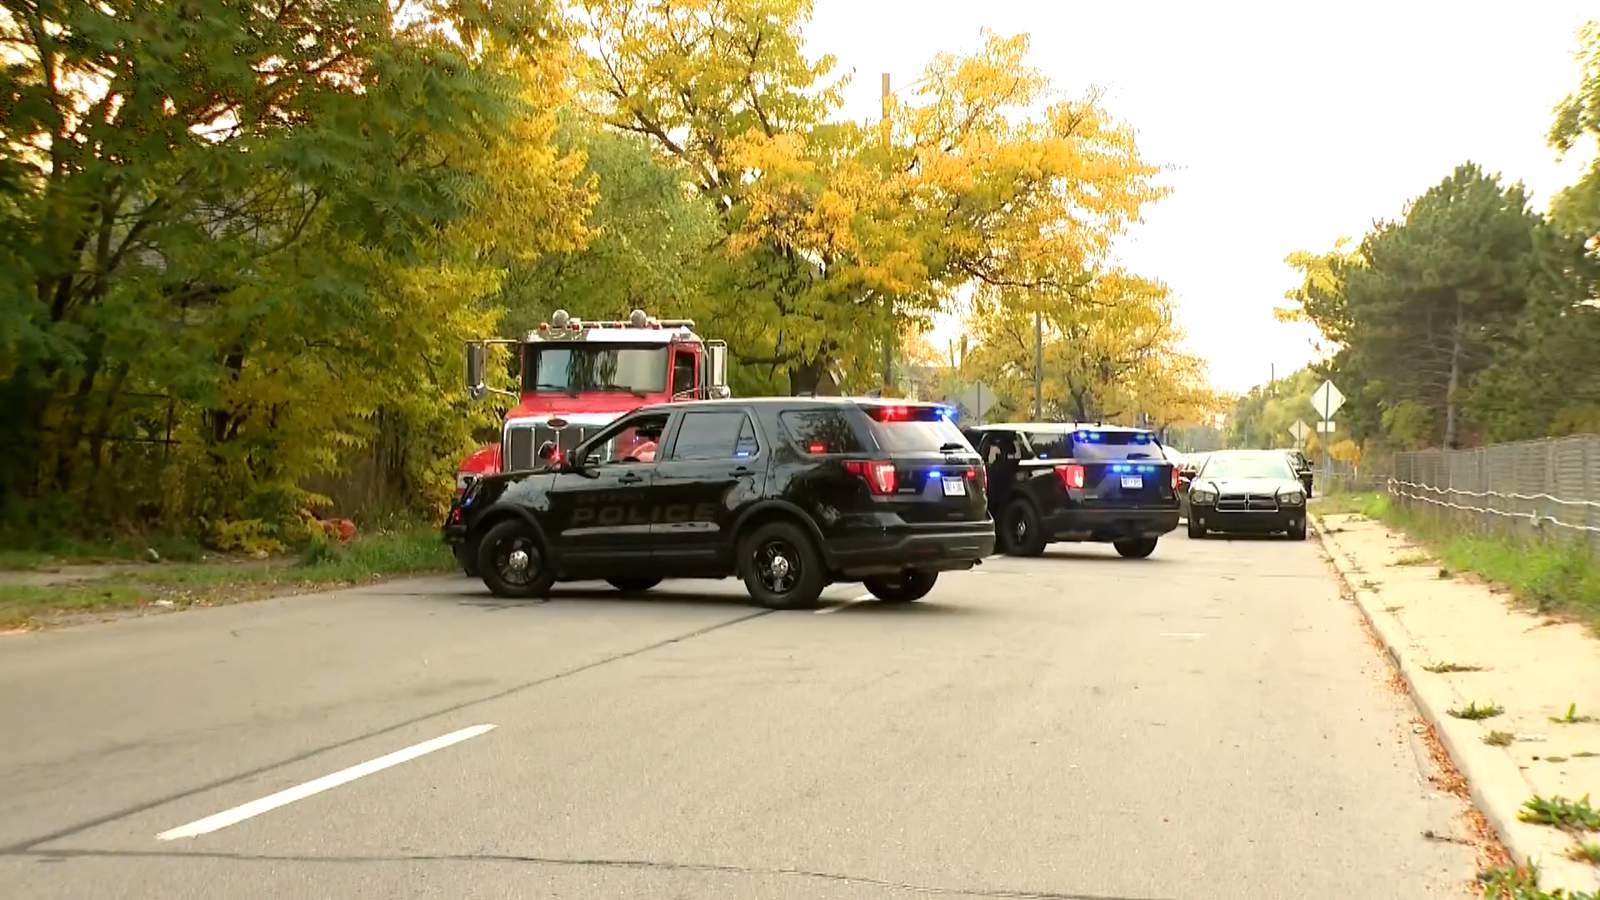 Body of fatally shot tow truck driver found on Lodge Service Drive on Detroit’s west side